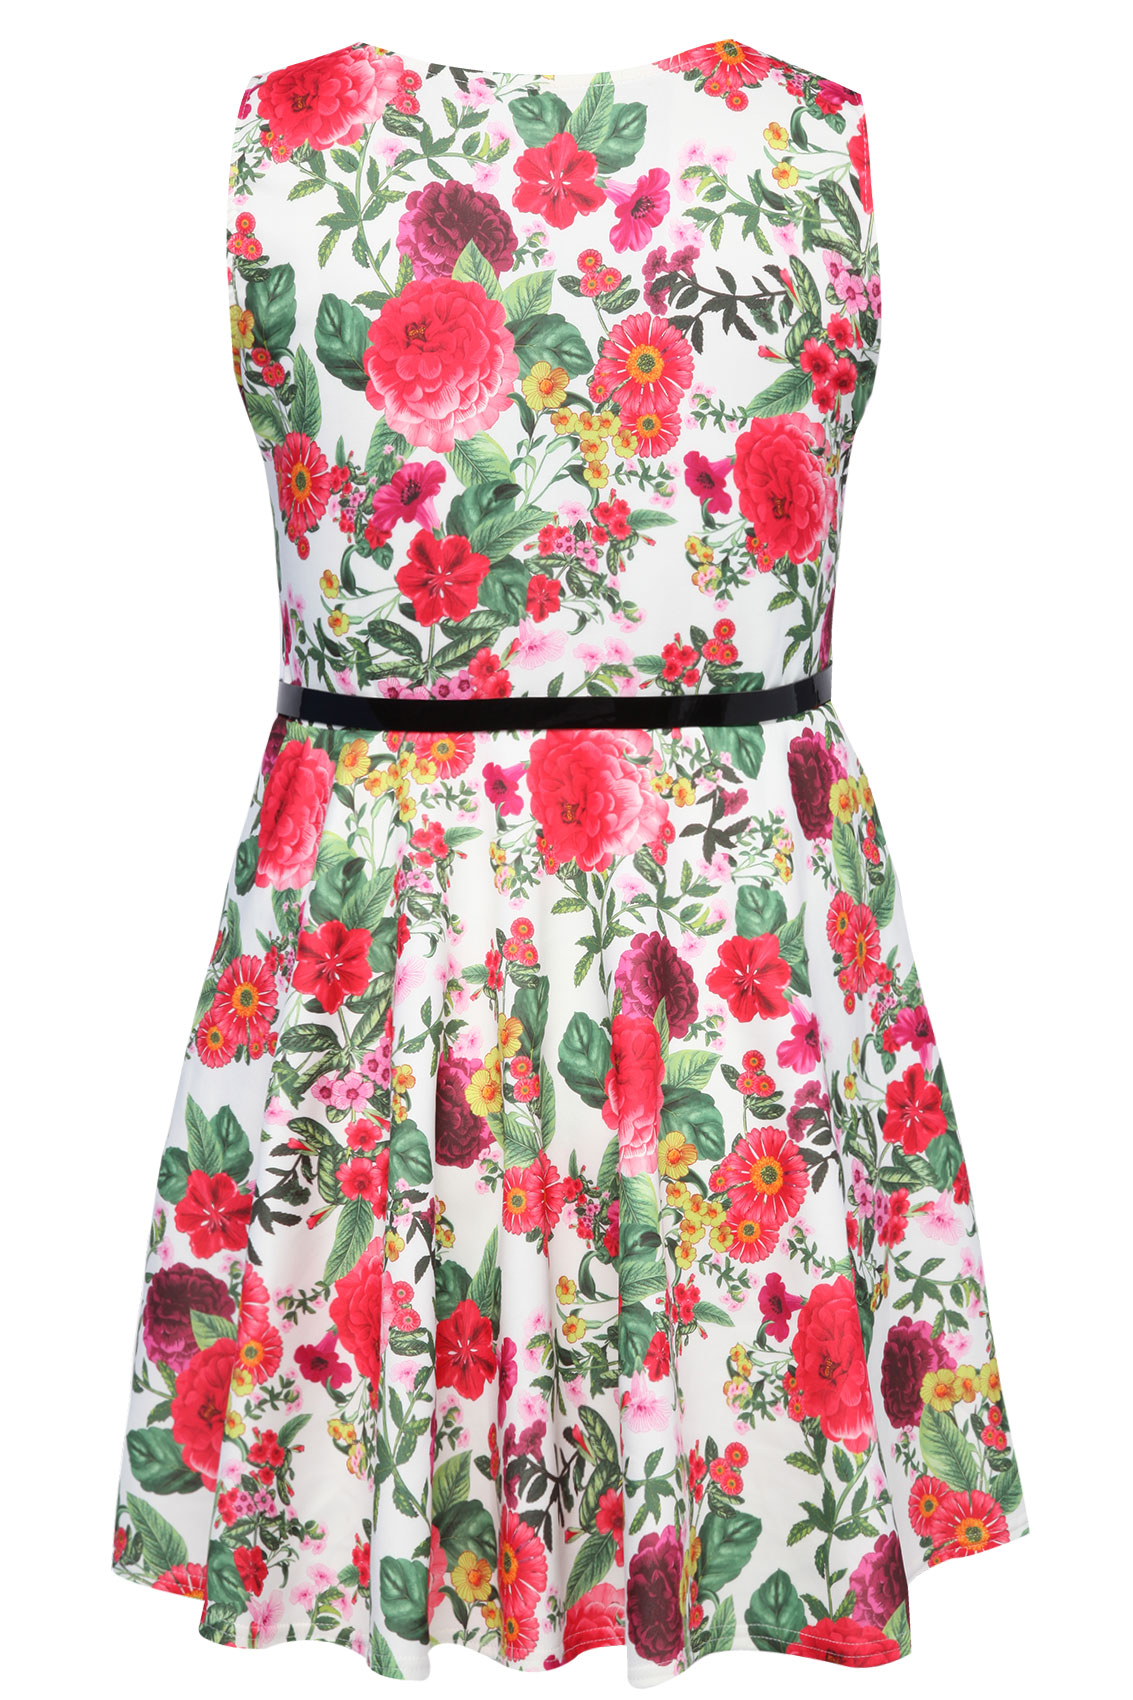 Pink And White Floral Print Skater Dress With Black Patent Belt plus ...